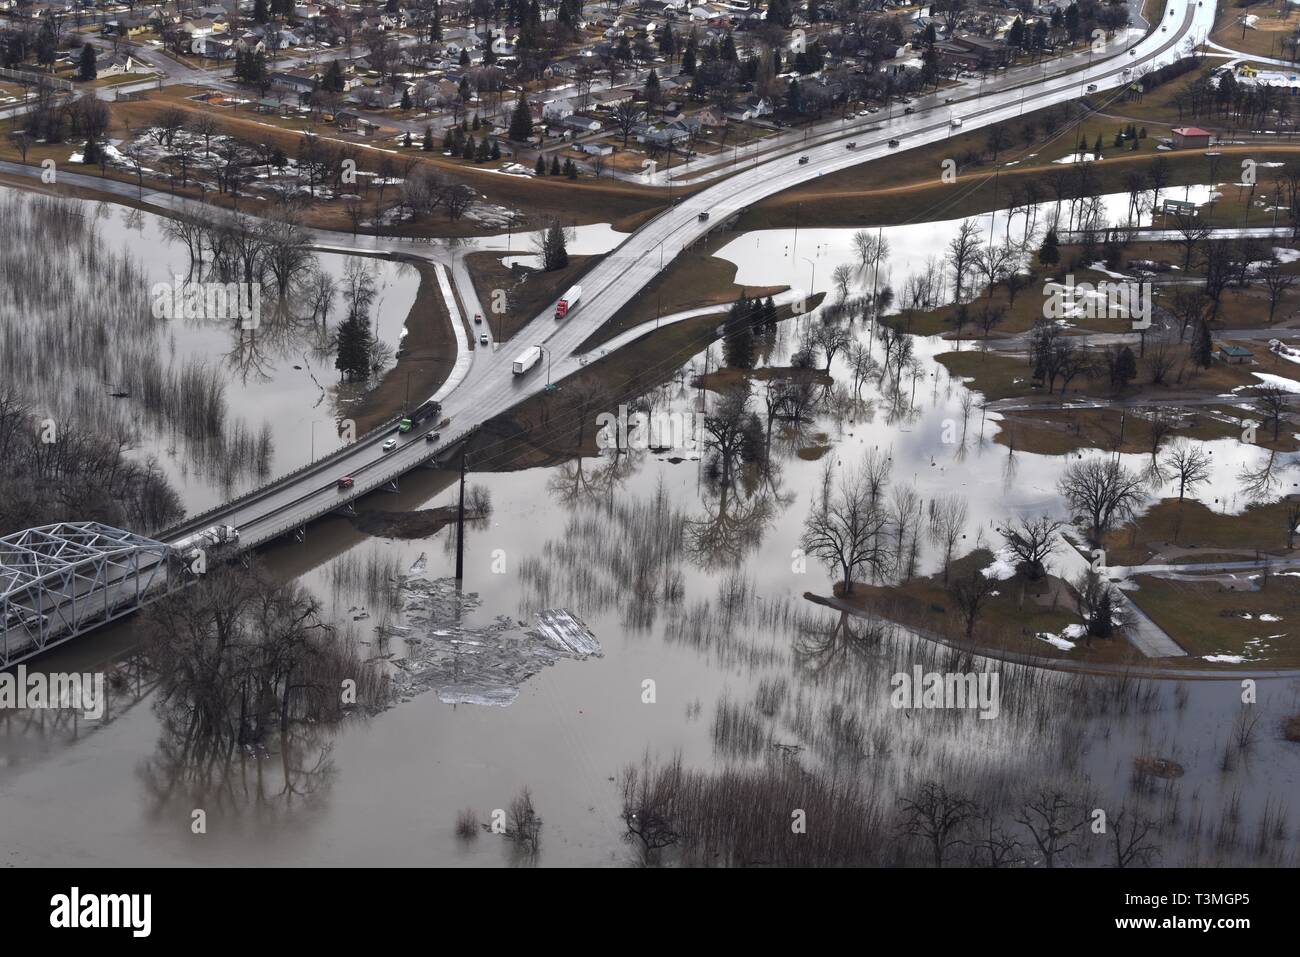 Aerial view of spring floods along the Red River and Red Lake River by the Sorlie Bridge April 8, 2019 in Grand Forks, North Dakota. The record flooding is expected to worsen as a late winter storm barrels into the midwestern United States over the next few days. Stock Photo